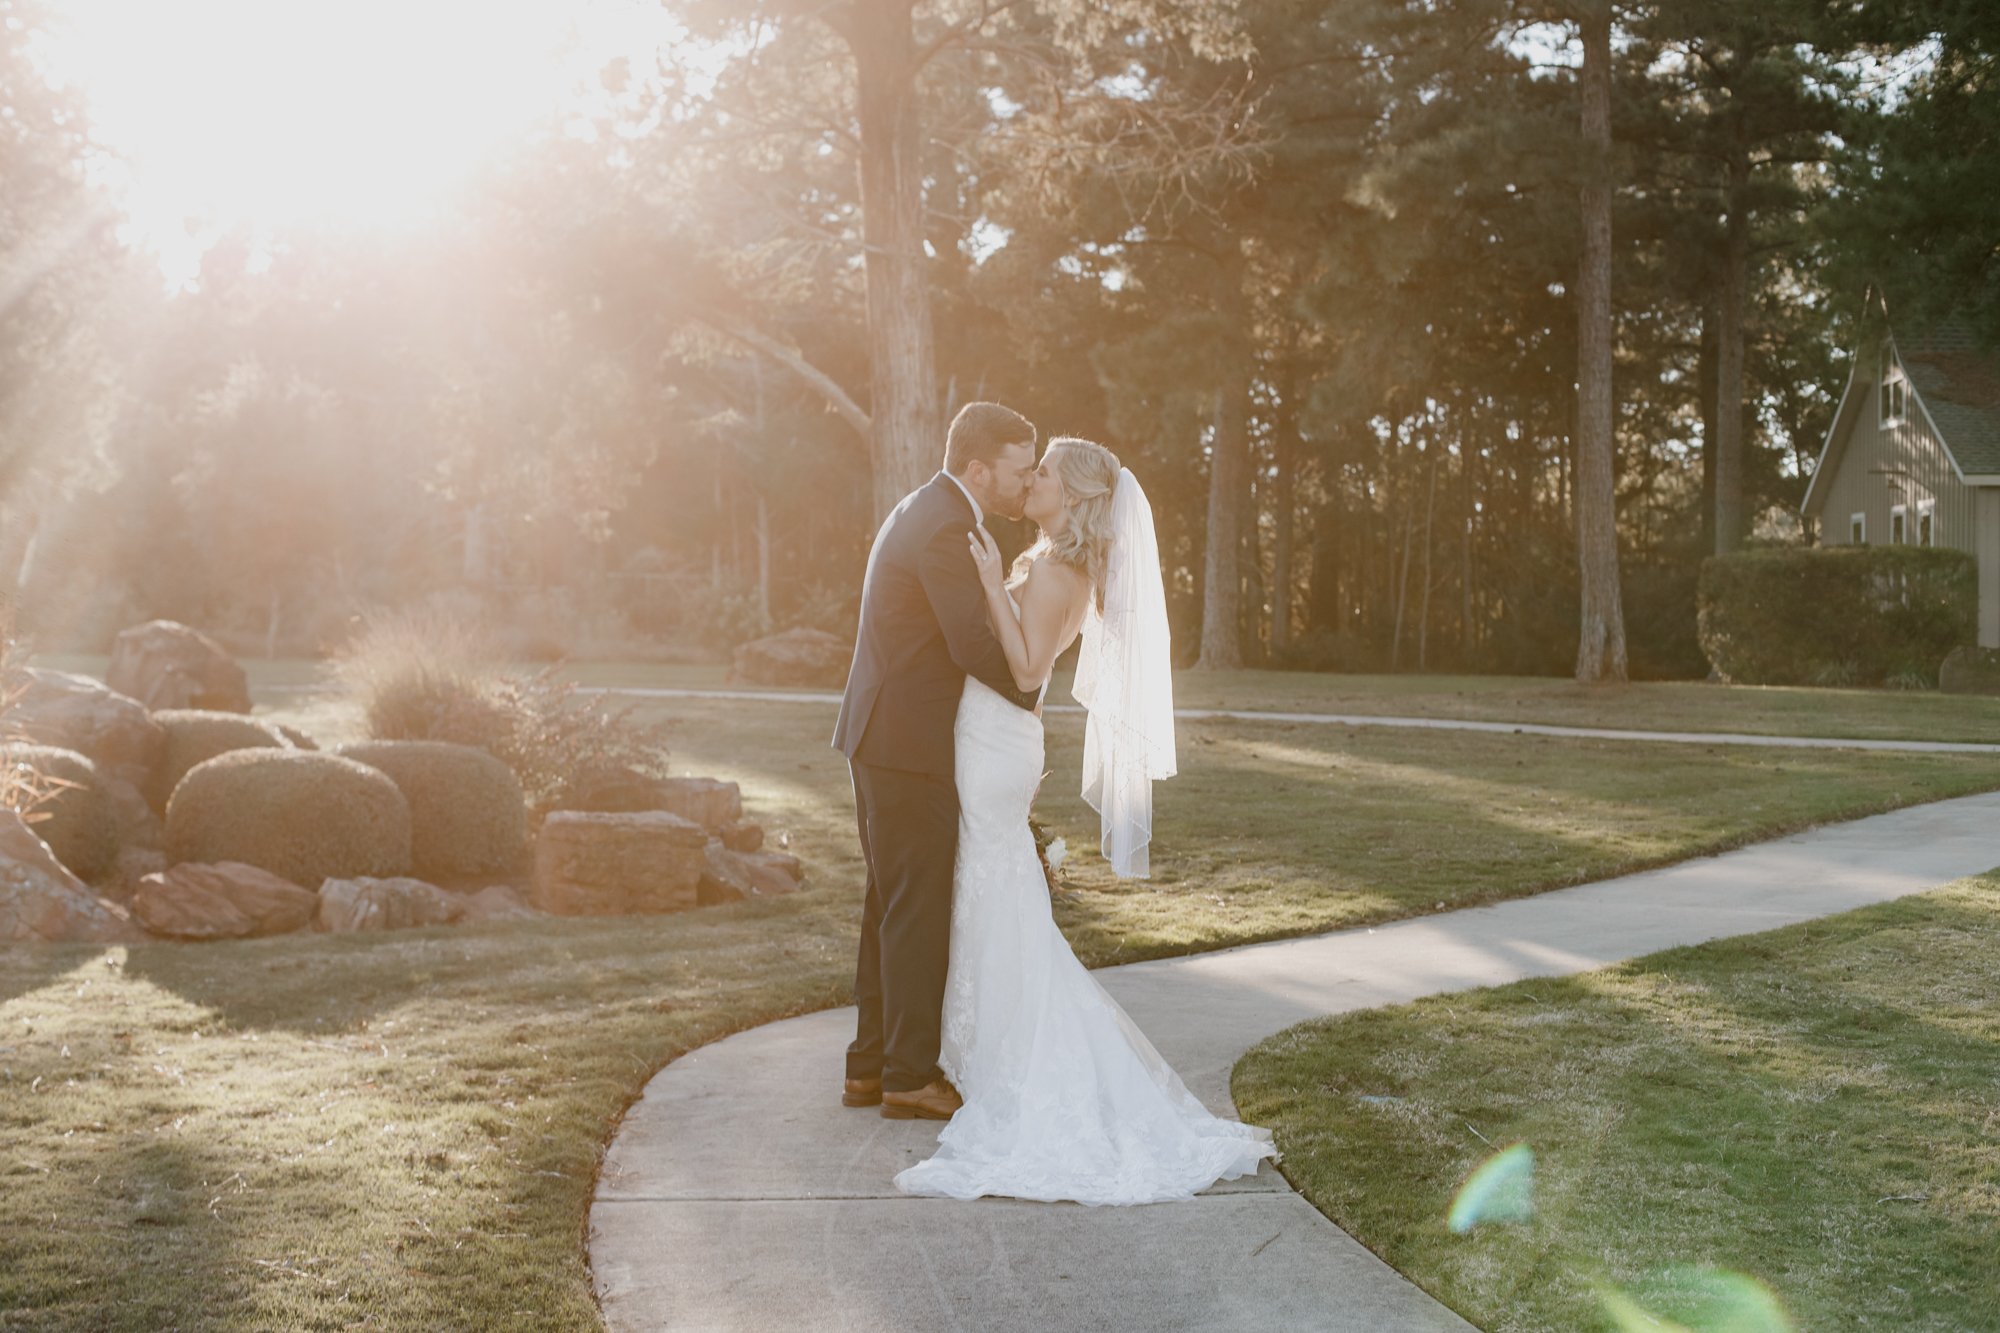 Bride and groom kiss in sunlight - golden hour portraits. Wedding at The Vine (New Ulm, TX)